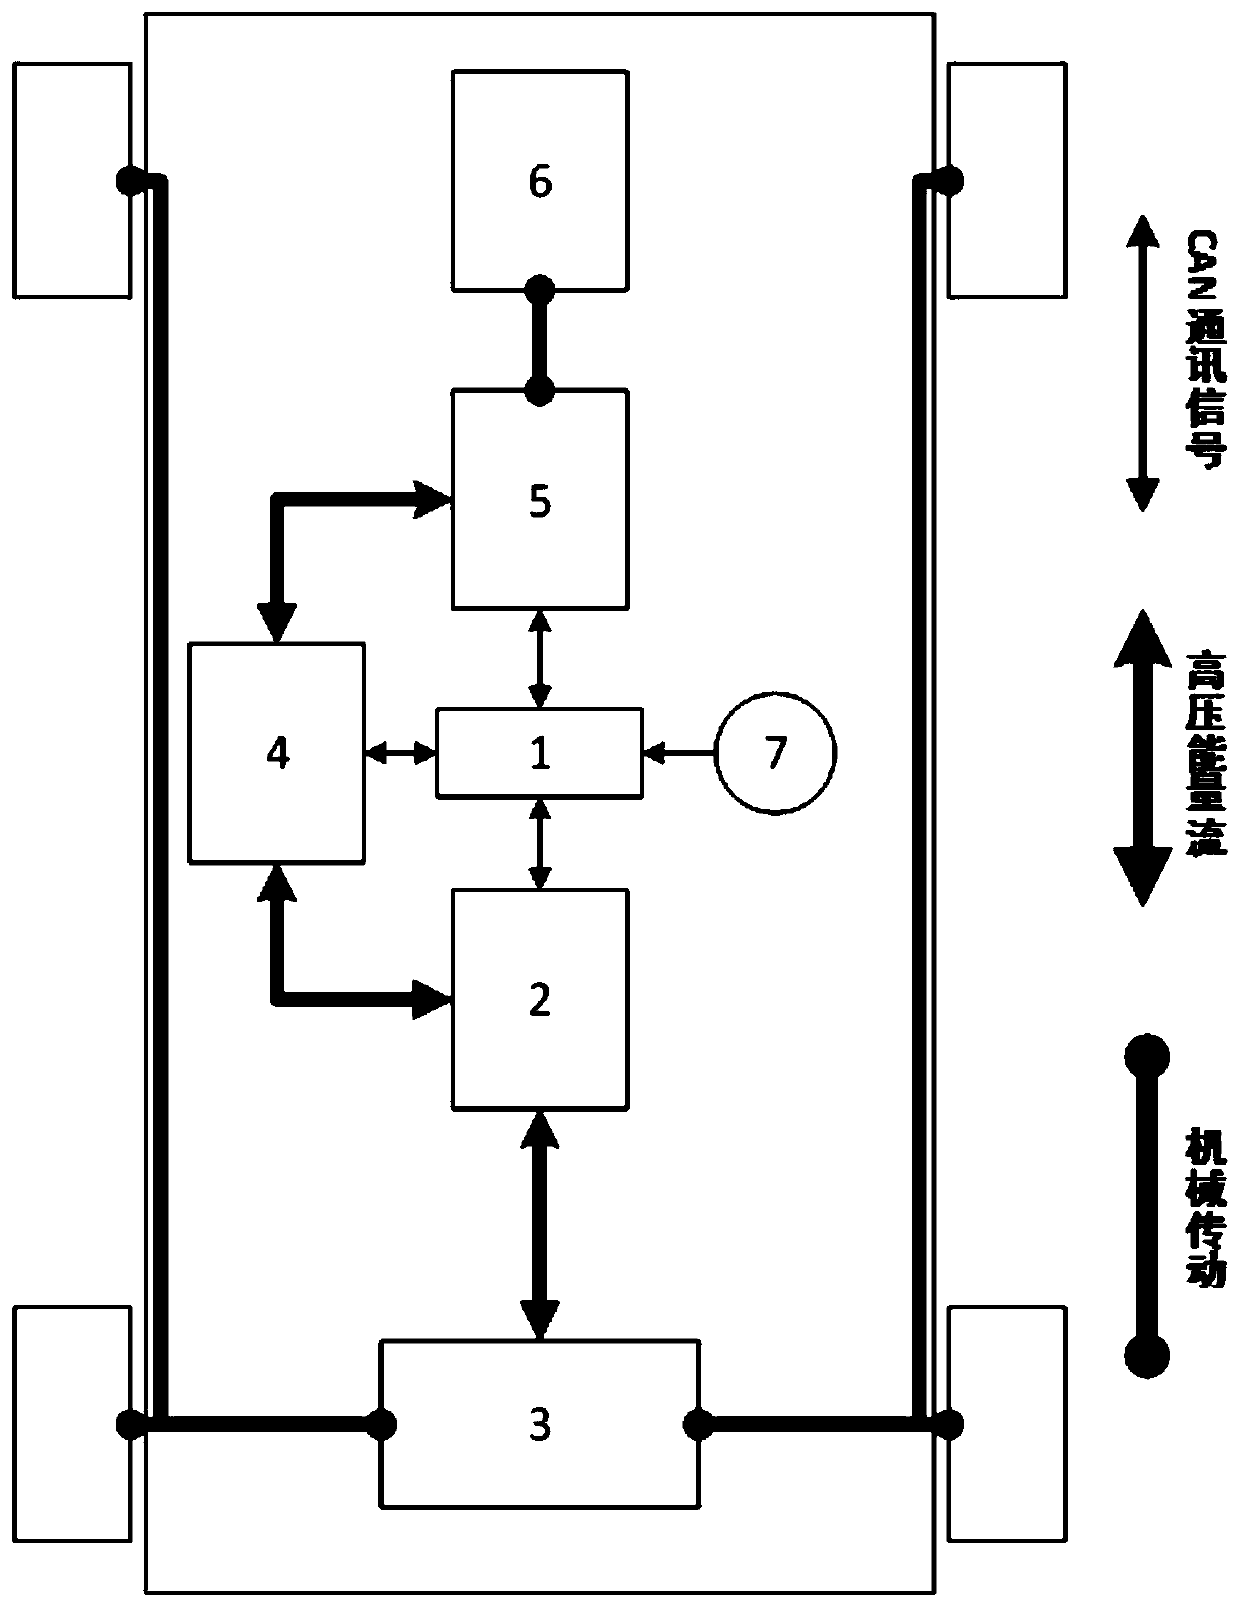 Control method for quick starting of engine of hybrid electric vehicle